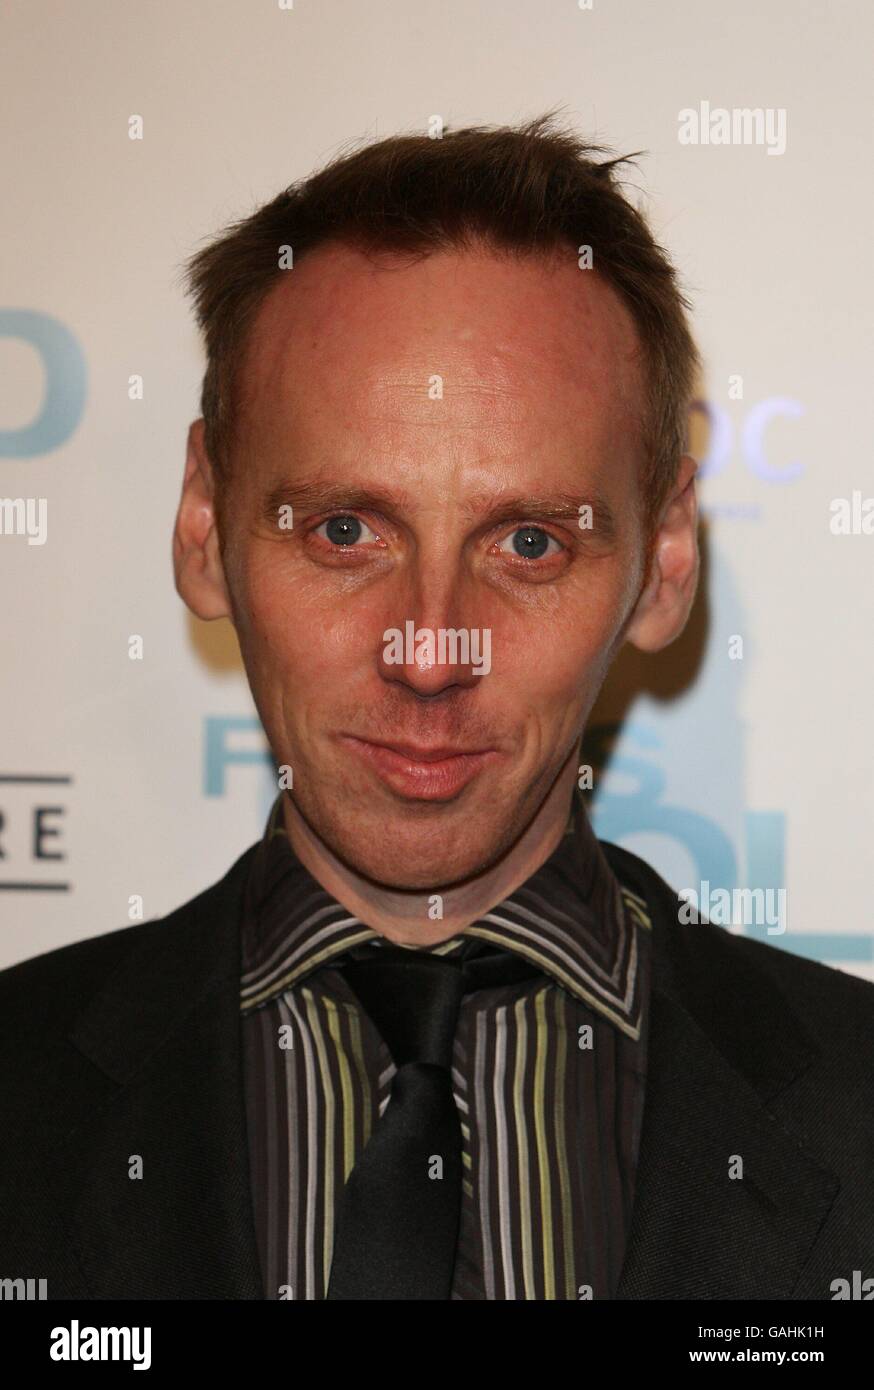 Fool's Gold premiere - Los Angeles. Ewen Bremner arrives at the premiere for Fool's Gold at the Grauman's Chinese Theatre, Los Angeles. Stock Photo